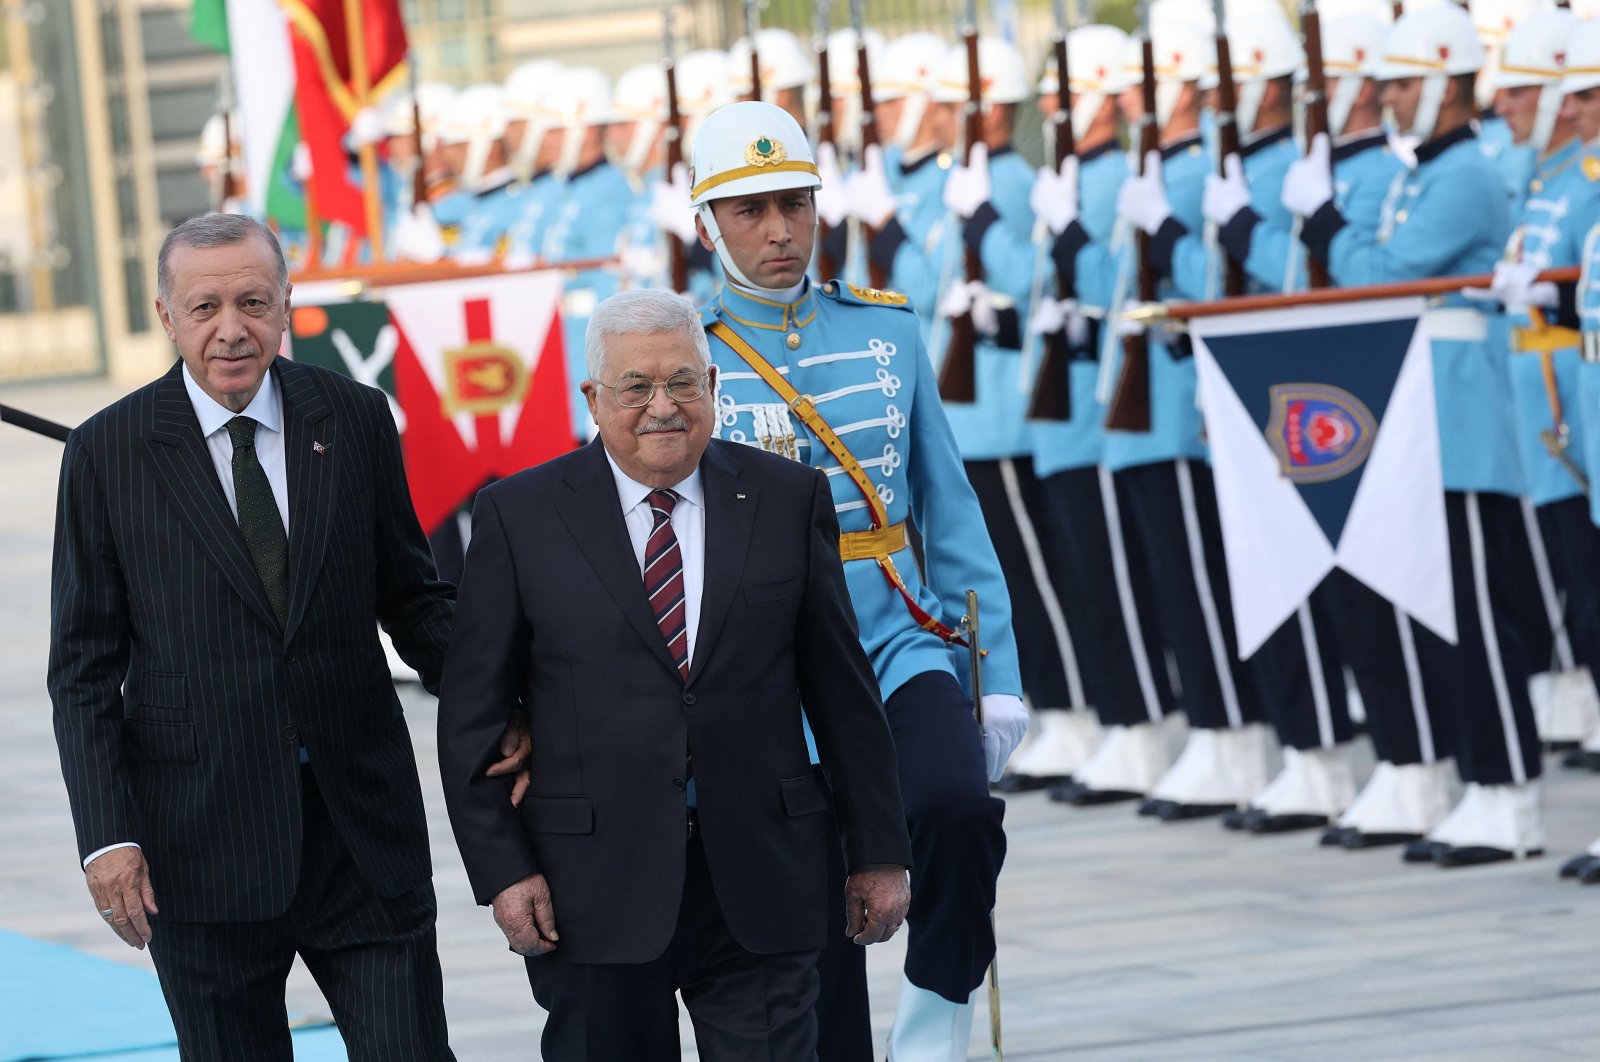 President Recep Tayyip Erdoğan (L) welcomes Palestinian President Mahmoud Abbas (C) prior to their meeting during an official welcoming ceremony at the Presidential Complex in Ankara, Aug. 23, 2022. (AFP Photo)